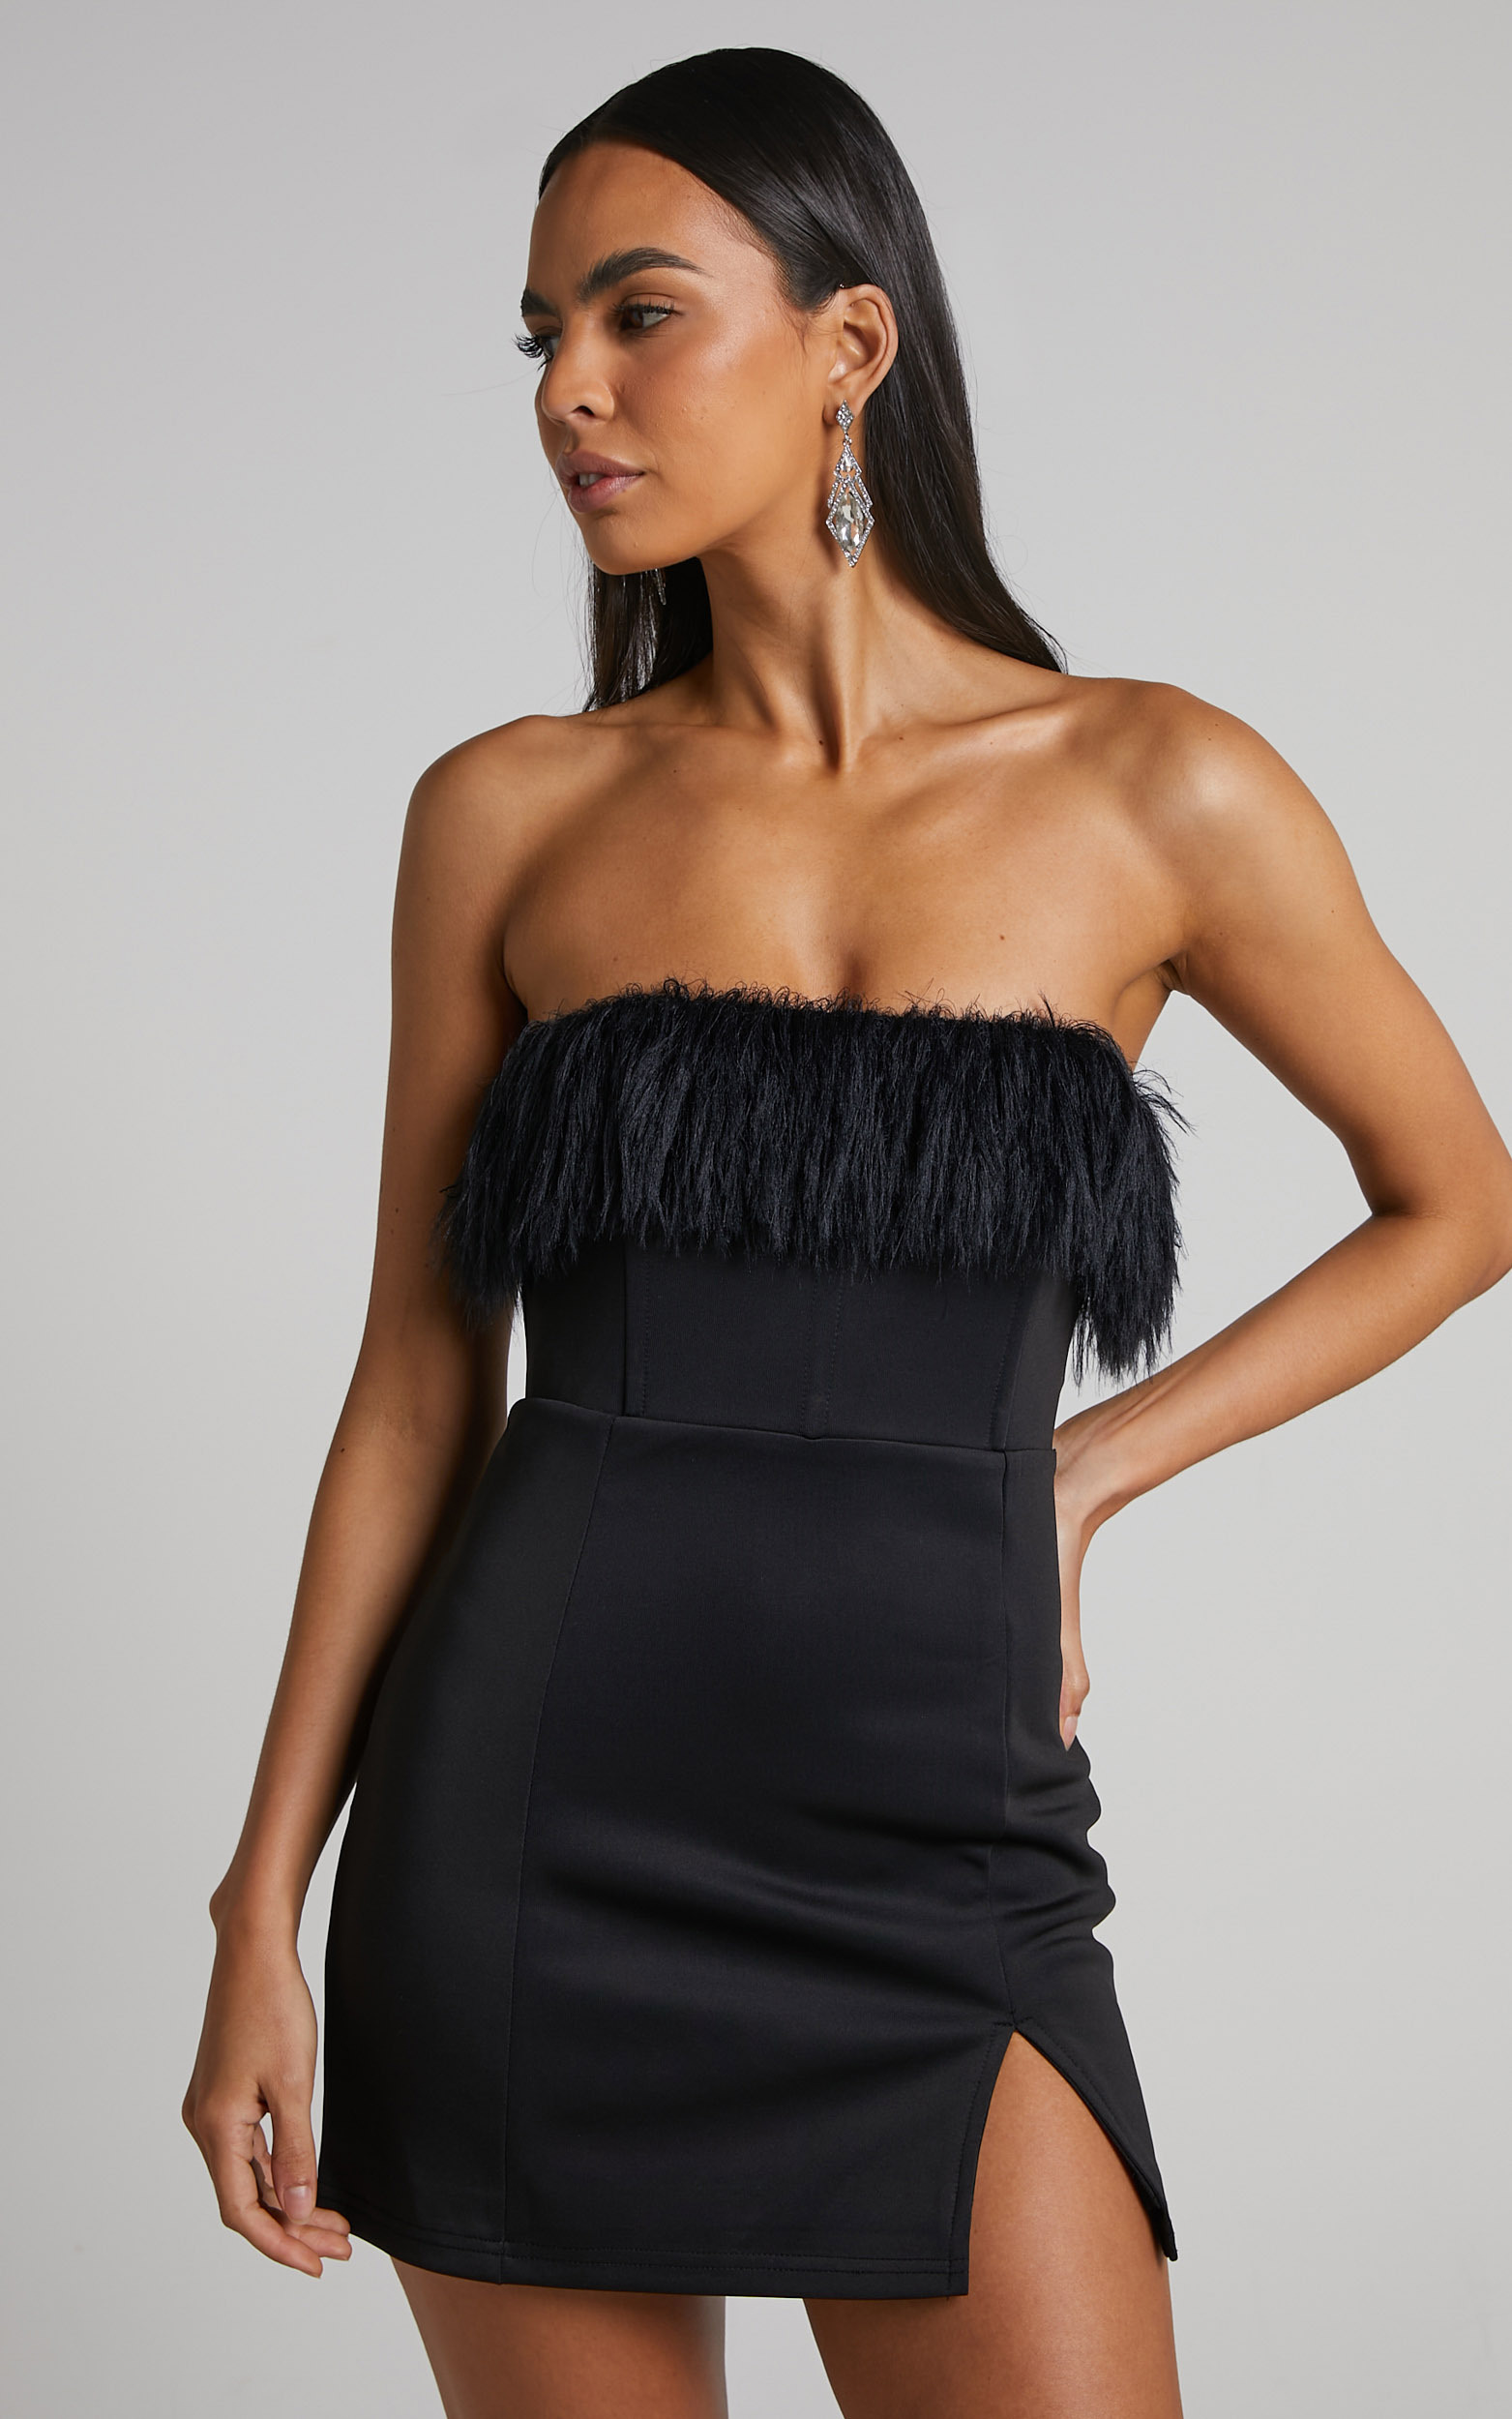 Rhaiza Mini Dress - Faux Feather Trim Strapless Dress in Black - 06, BLK1, hi-res image number null